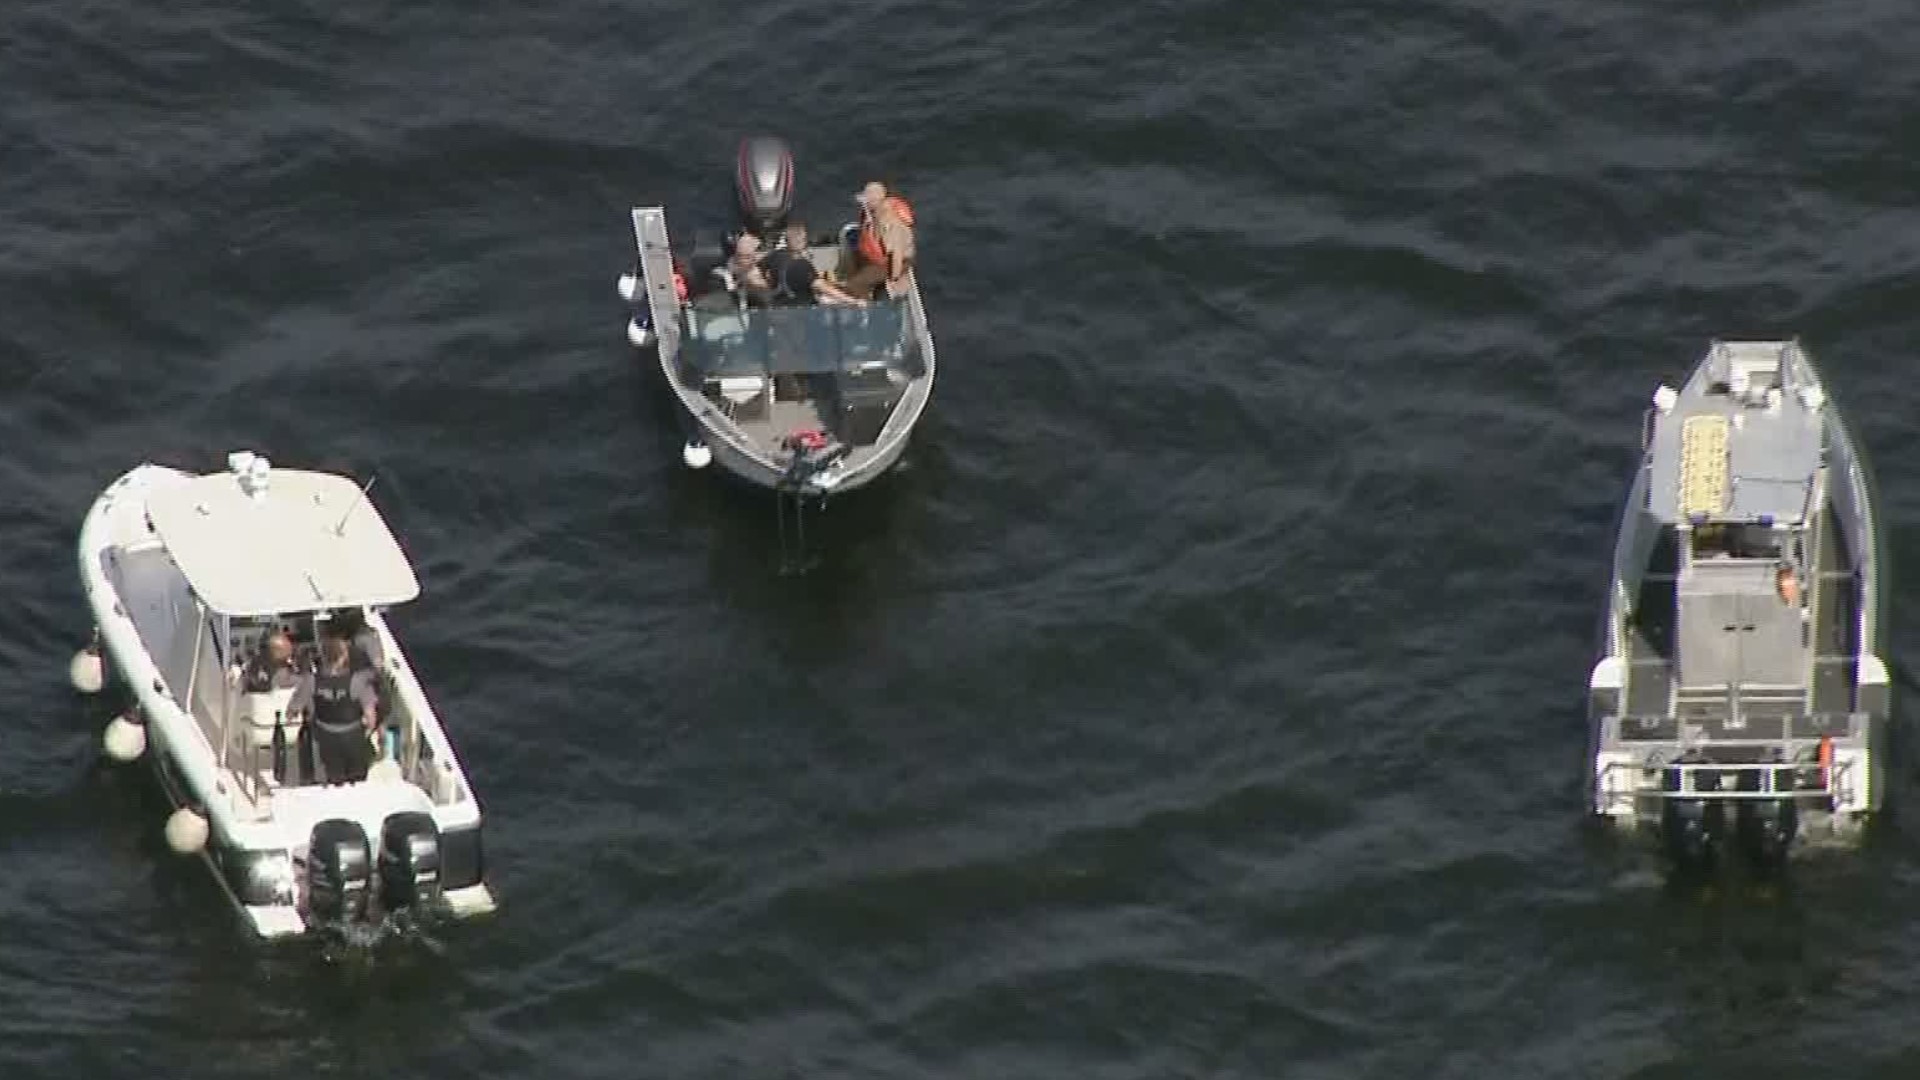 Crews are searching after a boater reported seeing an empty boat circling and a body in the St. Croix River.